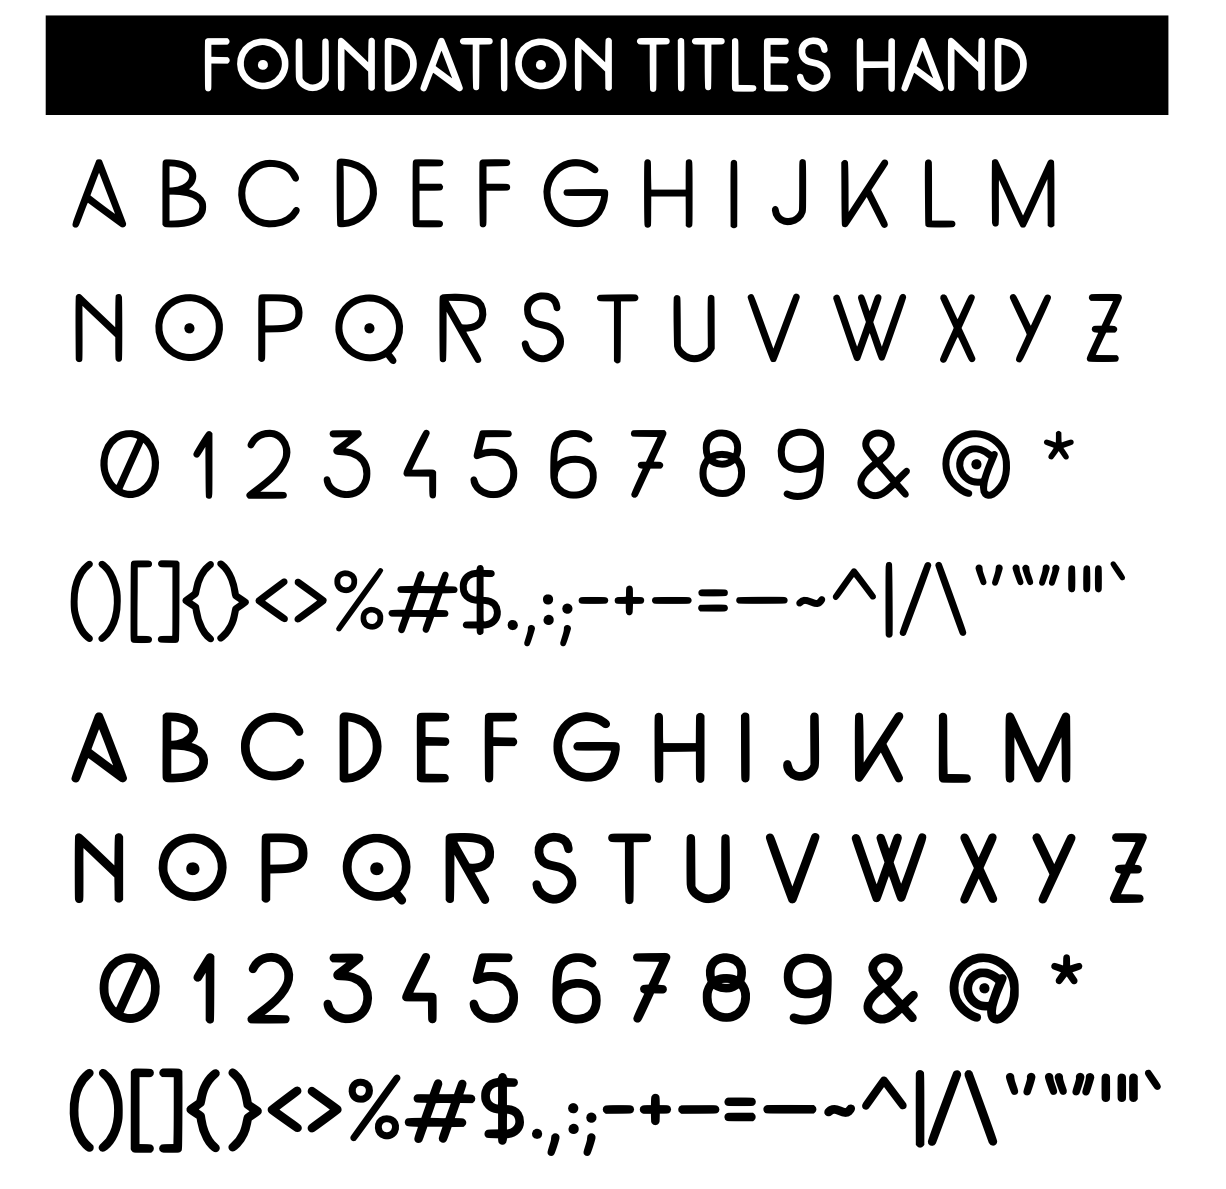 The normal and semibold characters of Foundation Titles font